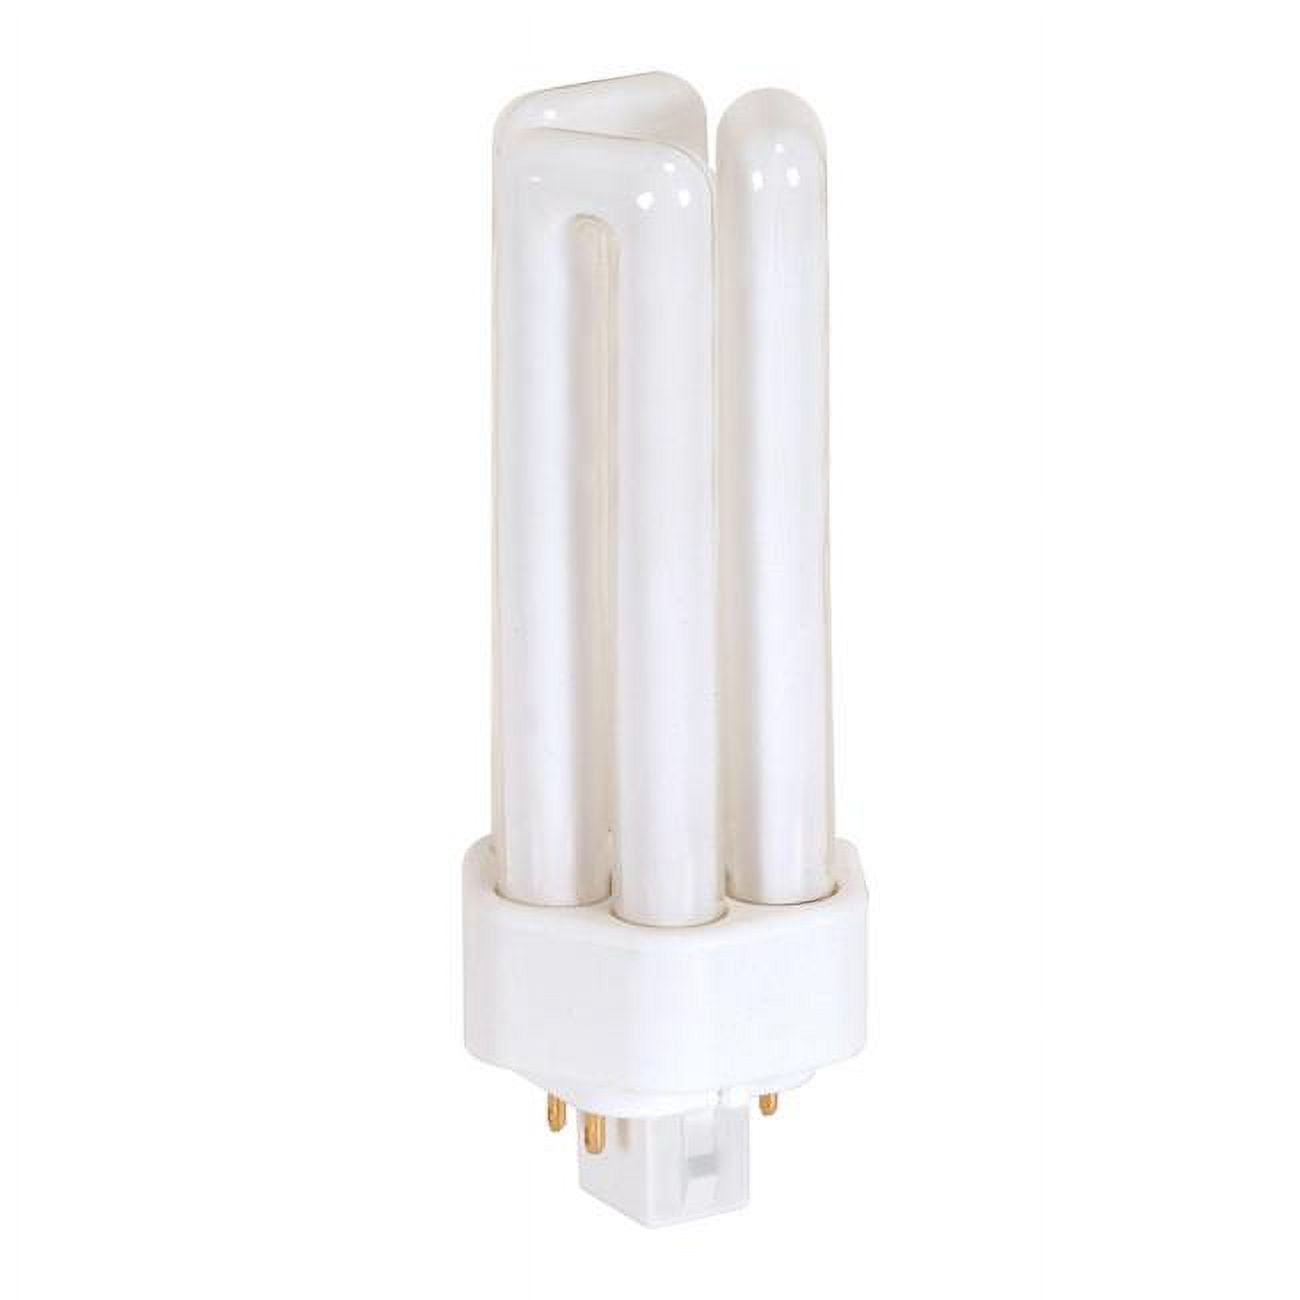 Picture of Satco Products 3009992 0.5 x 4.59 in. Satco 18W T4 CFL Soft White Tubular Bulb